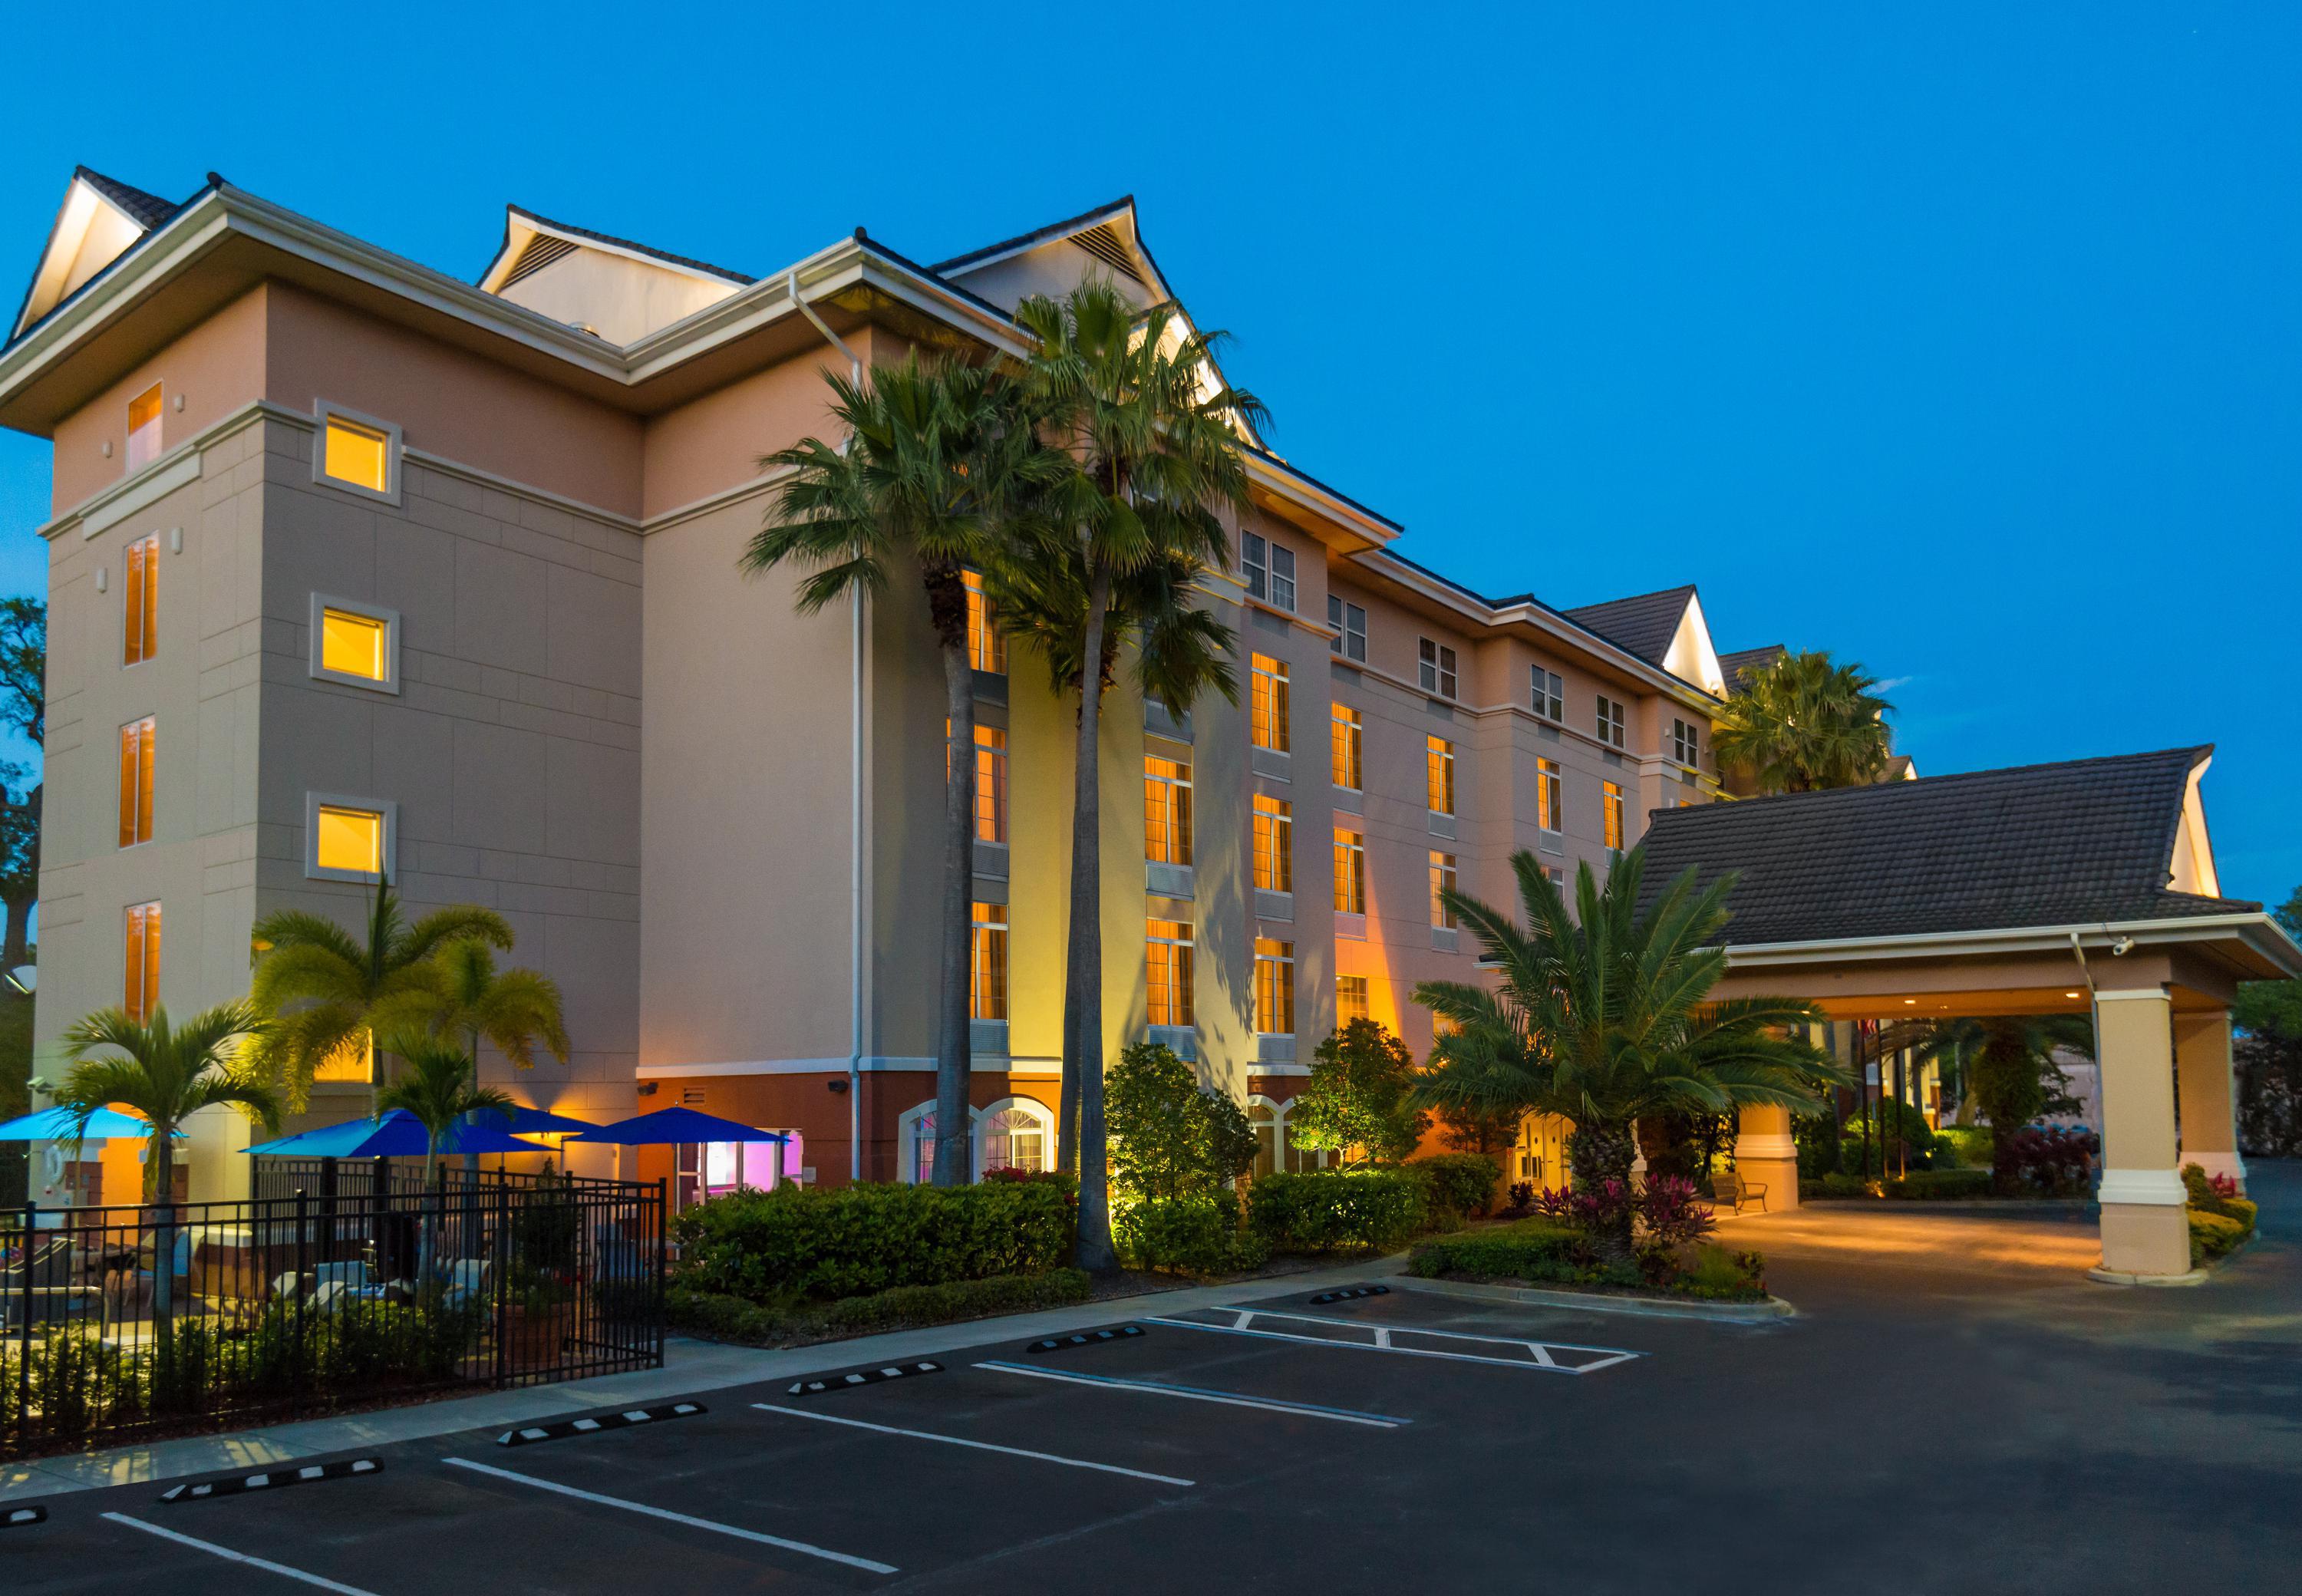 Photo of Fairfield Inn & Suites Clearwater, Clearwater, FL